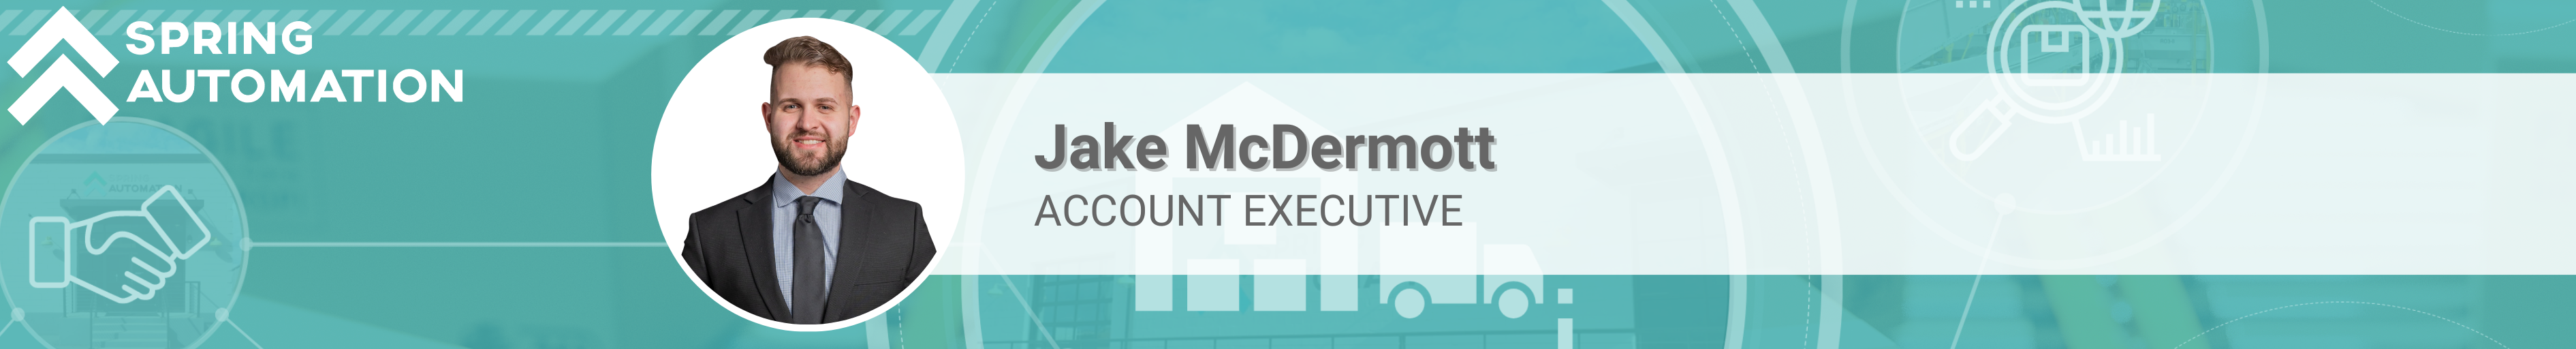 Jake McDermott Joins Spring Automation as an Account Executive